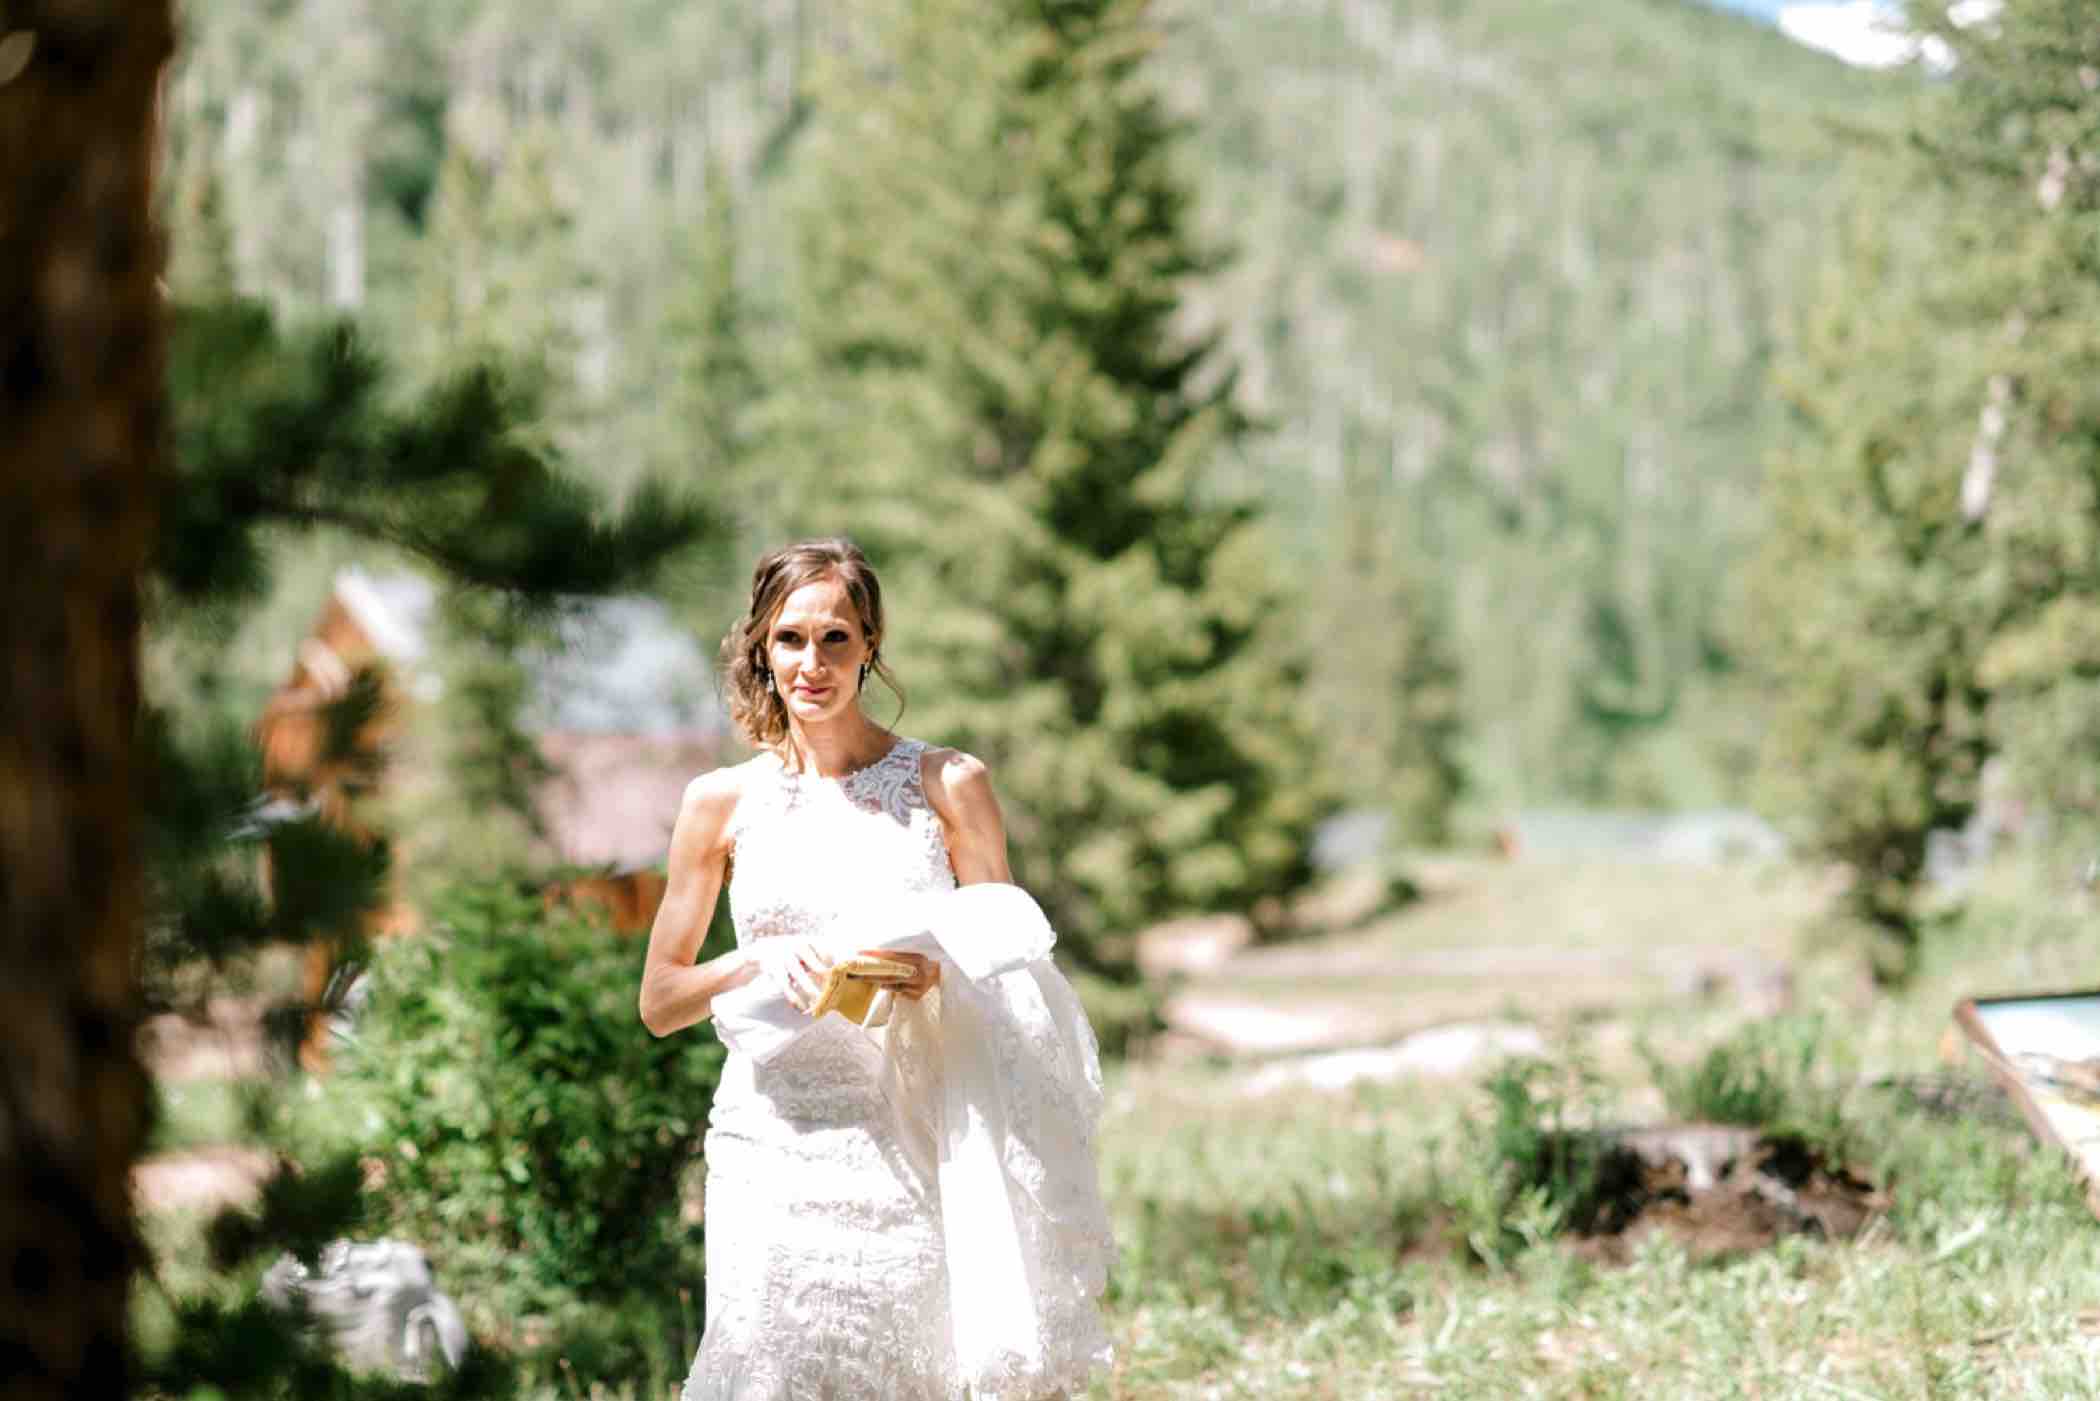 Sallie, the bride, arrives for her first touch ceremony with Kris outside Piney River Ranch in Vail Colorado. Photo by Ali and Garrett, Romantic, Adventurous, Nostalgic Wedding Photographers.